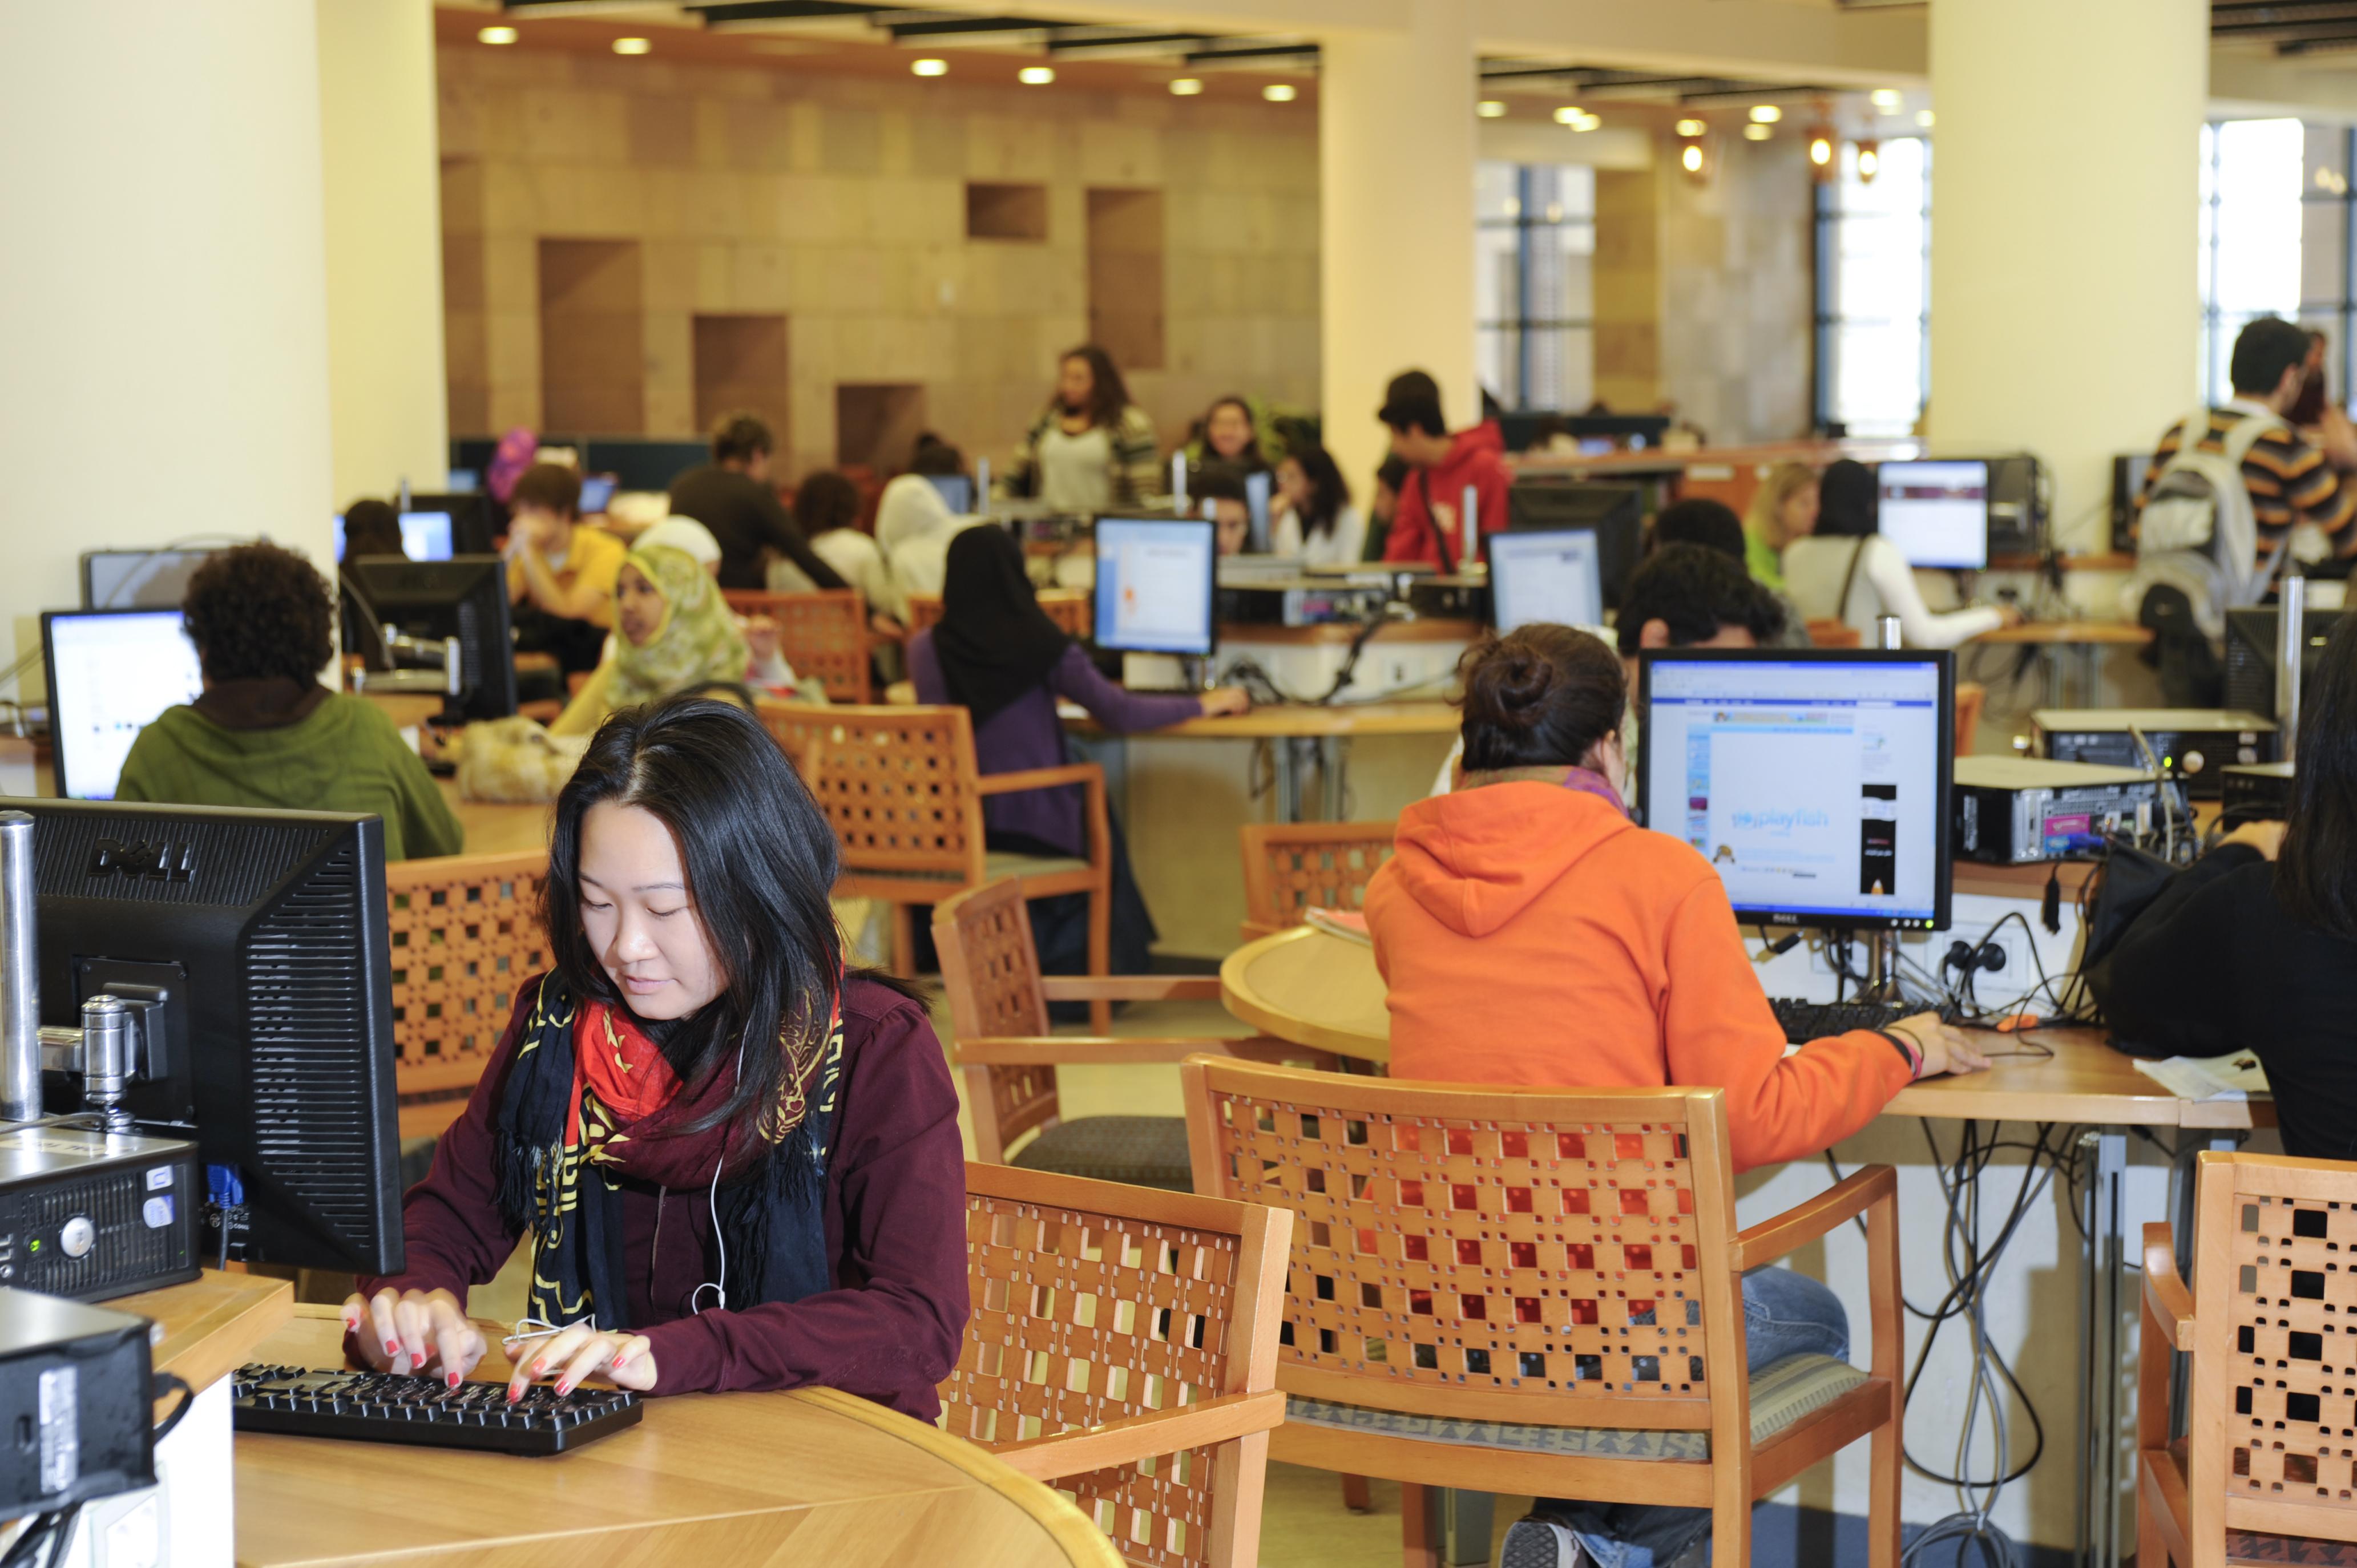 Students in Library Working